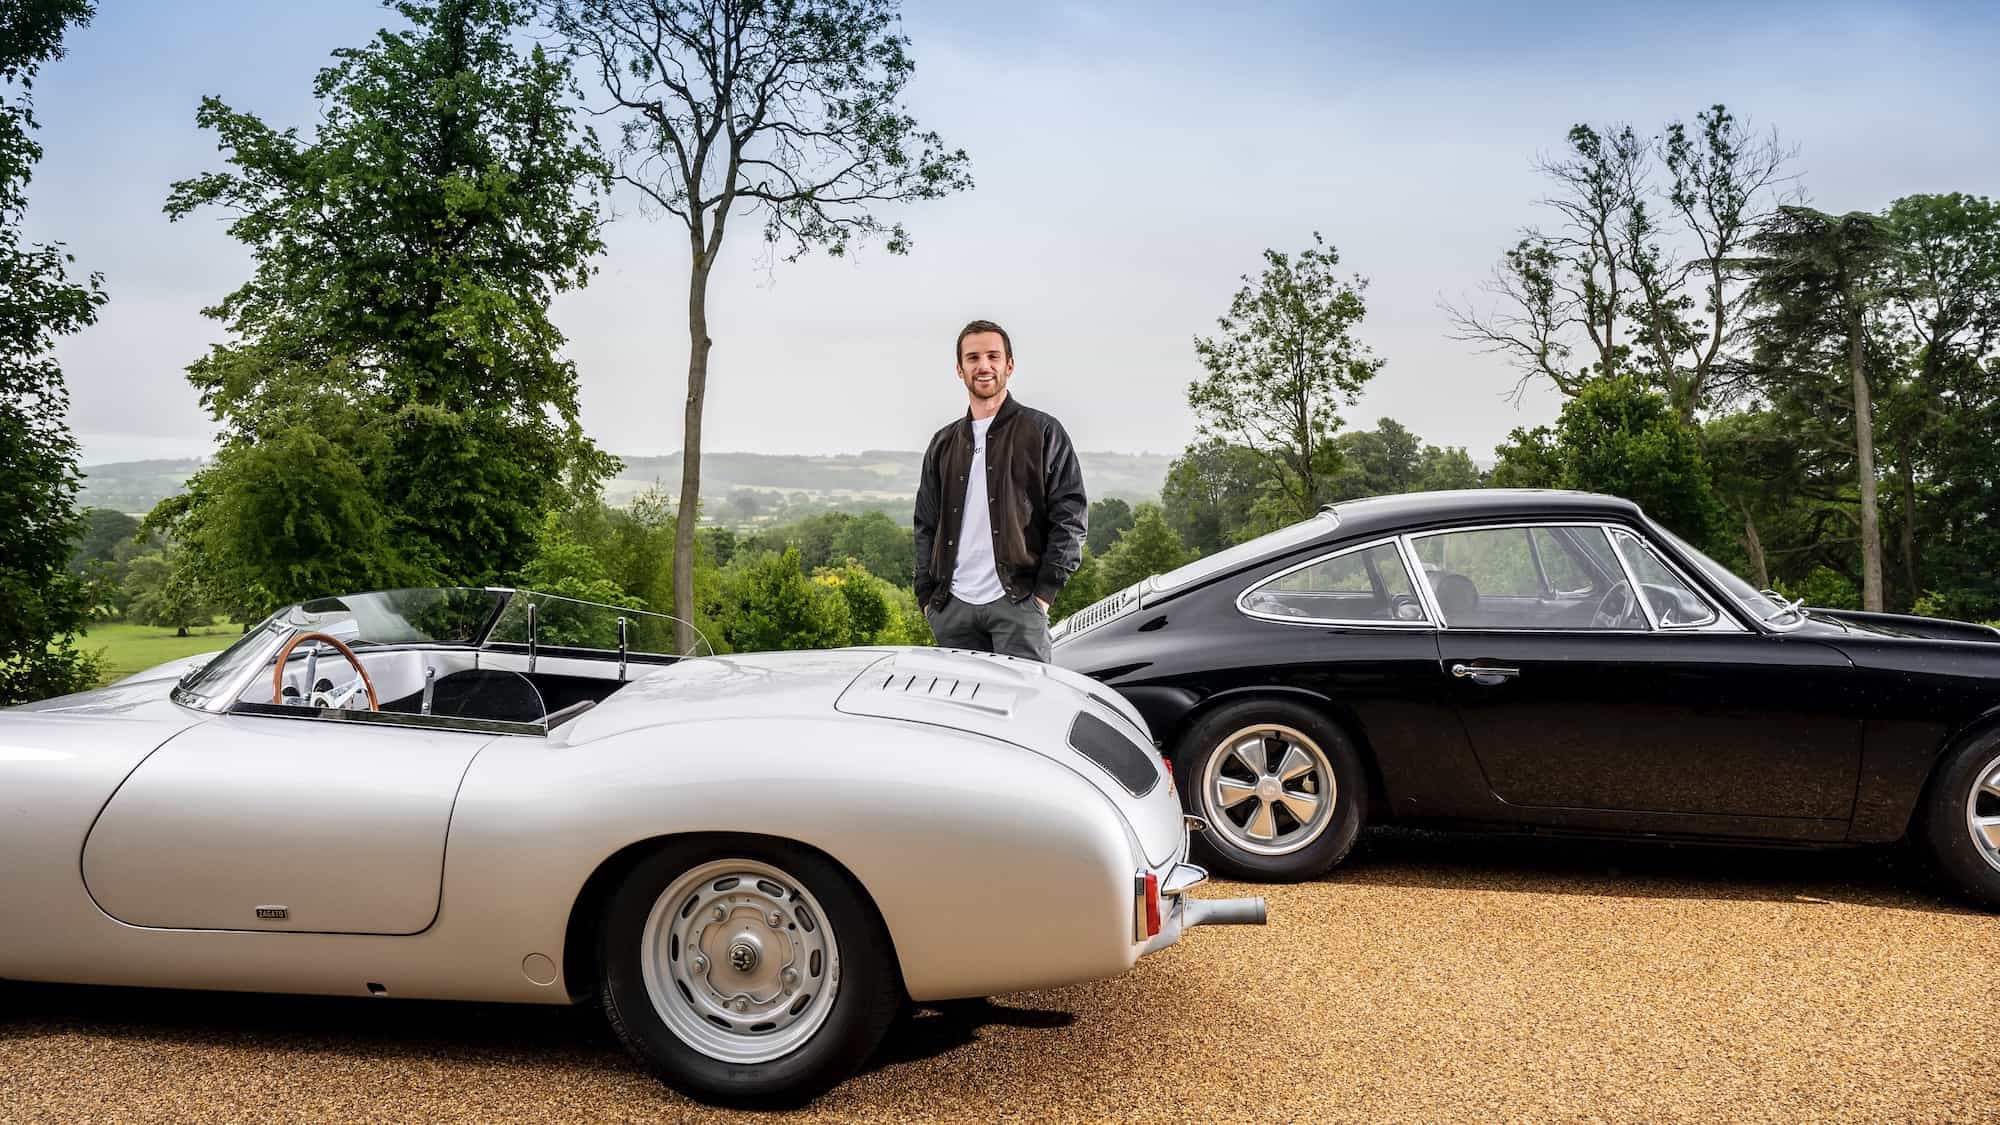 Coldplay Bassist Shows Off 'Groovy' Classic Porsche Collection